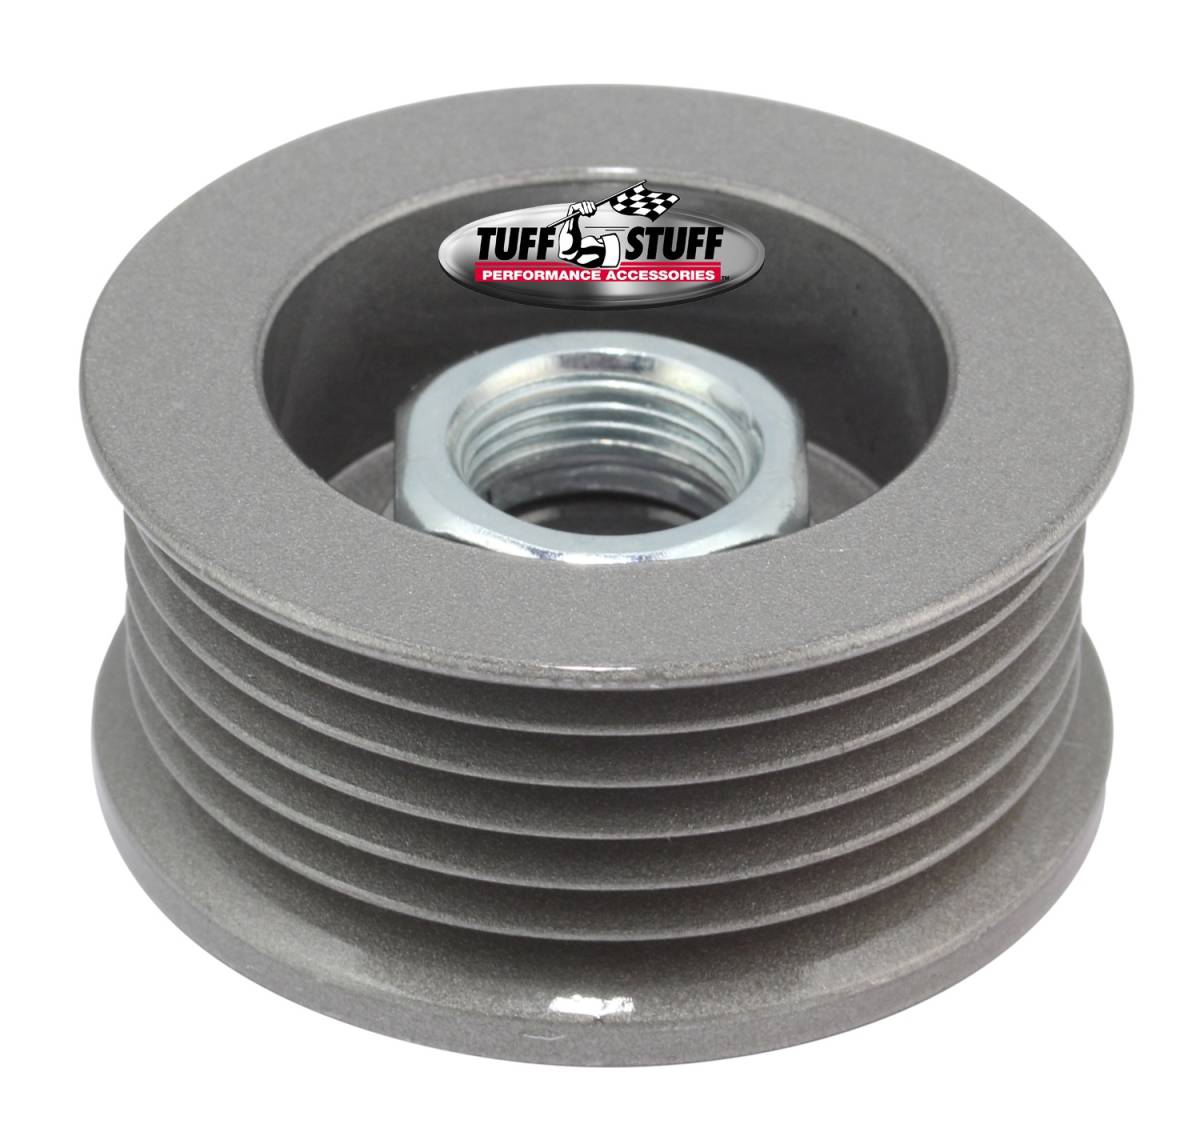 Tuff Stuff Performance - Alternator Pulley 2.25 in. 6 Groove Serpentine Incl. Lock Washer/Nut As Cast 7610AC